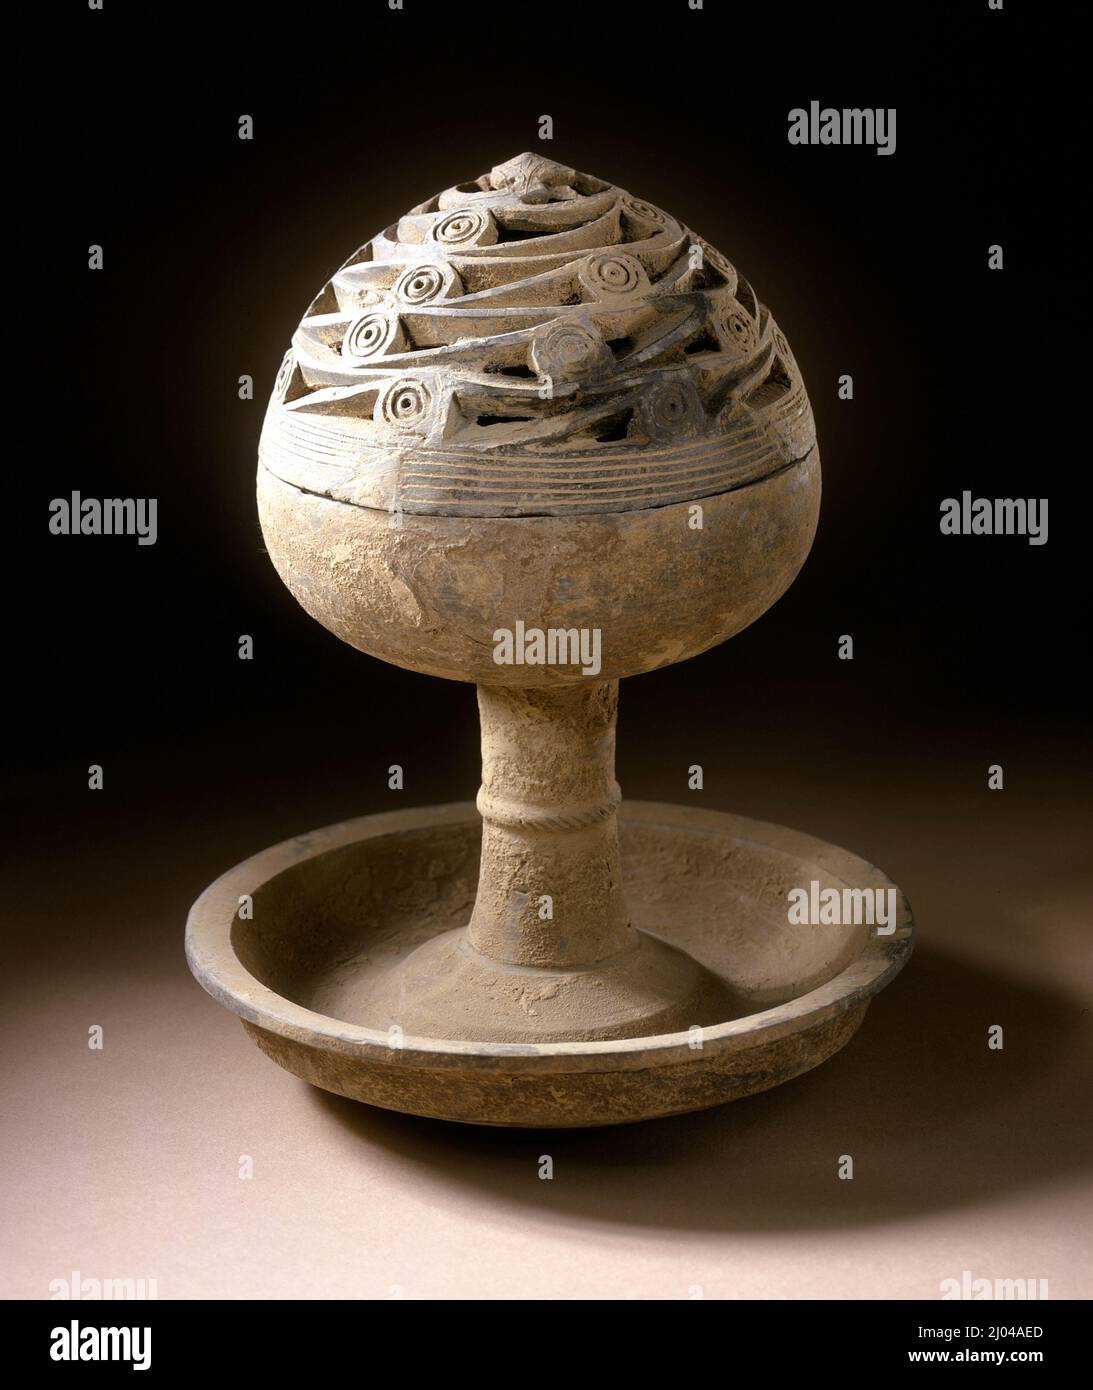 Lidded Incense Burner (Boshanlu) with Cloud Scrolls. China, Eastern Han dynasty, 25-220. Tools and Equipment; burners. Wheel-thrown stoneware with cut and incised decoration Stock Photo